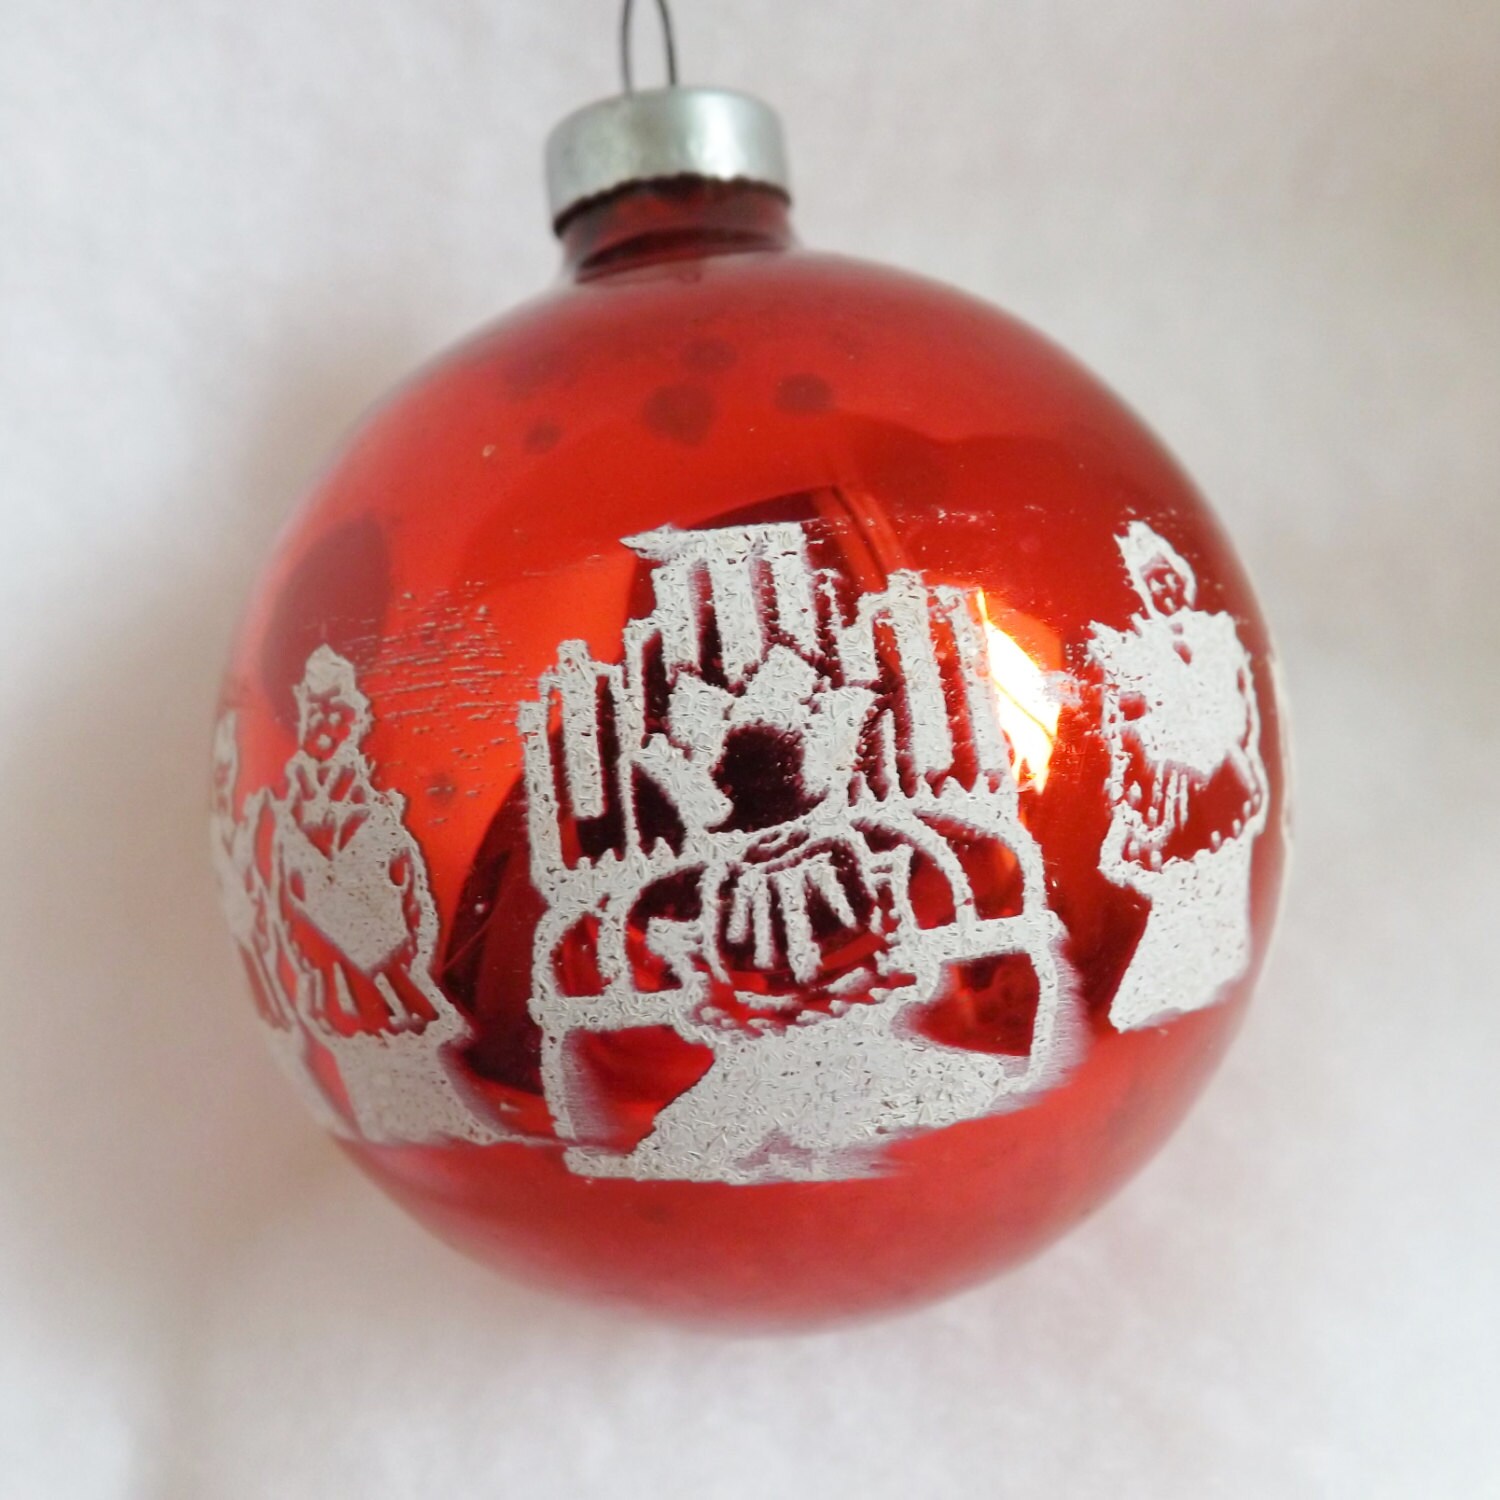 Vintage ornament red ornament glass ball ornament Christmas